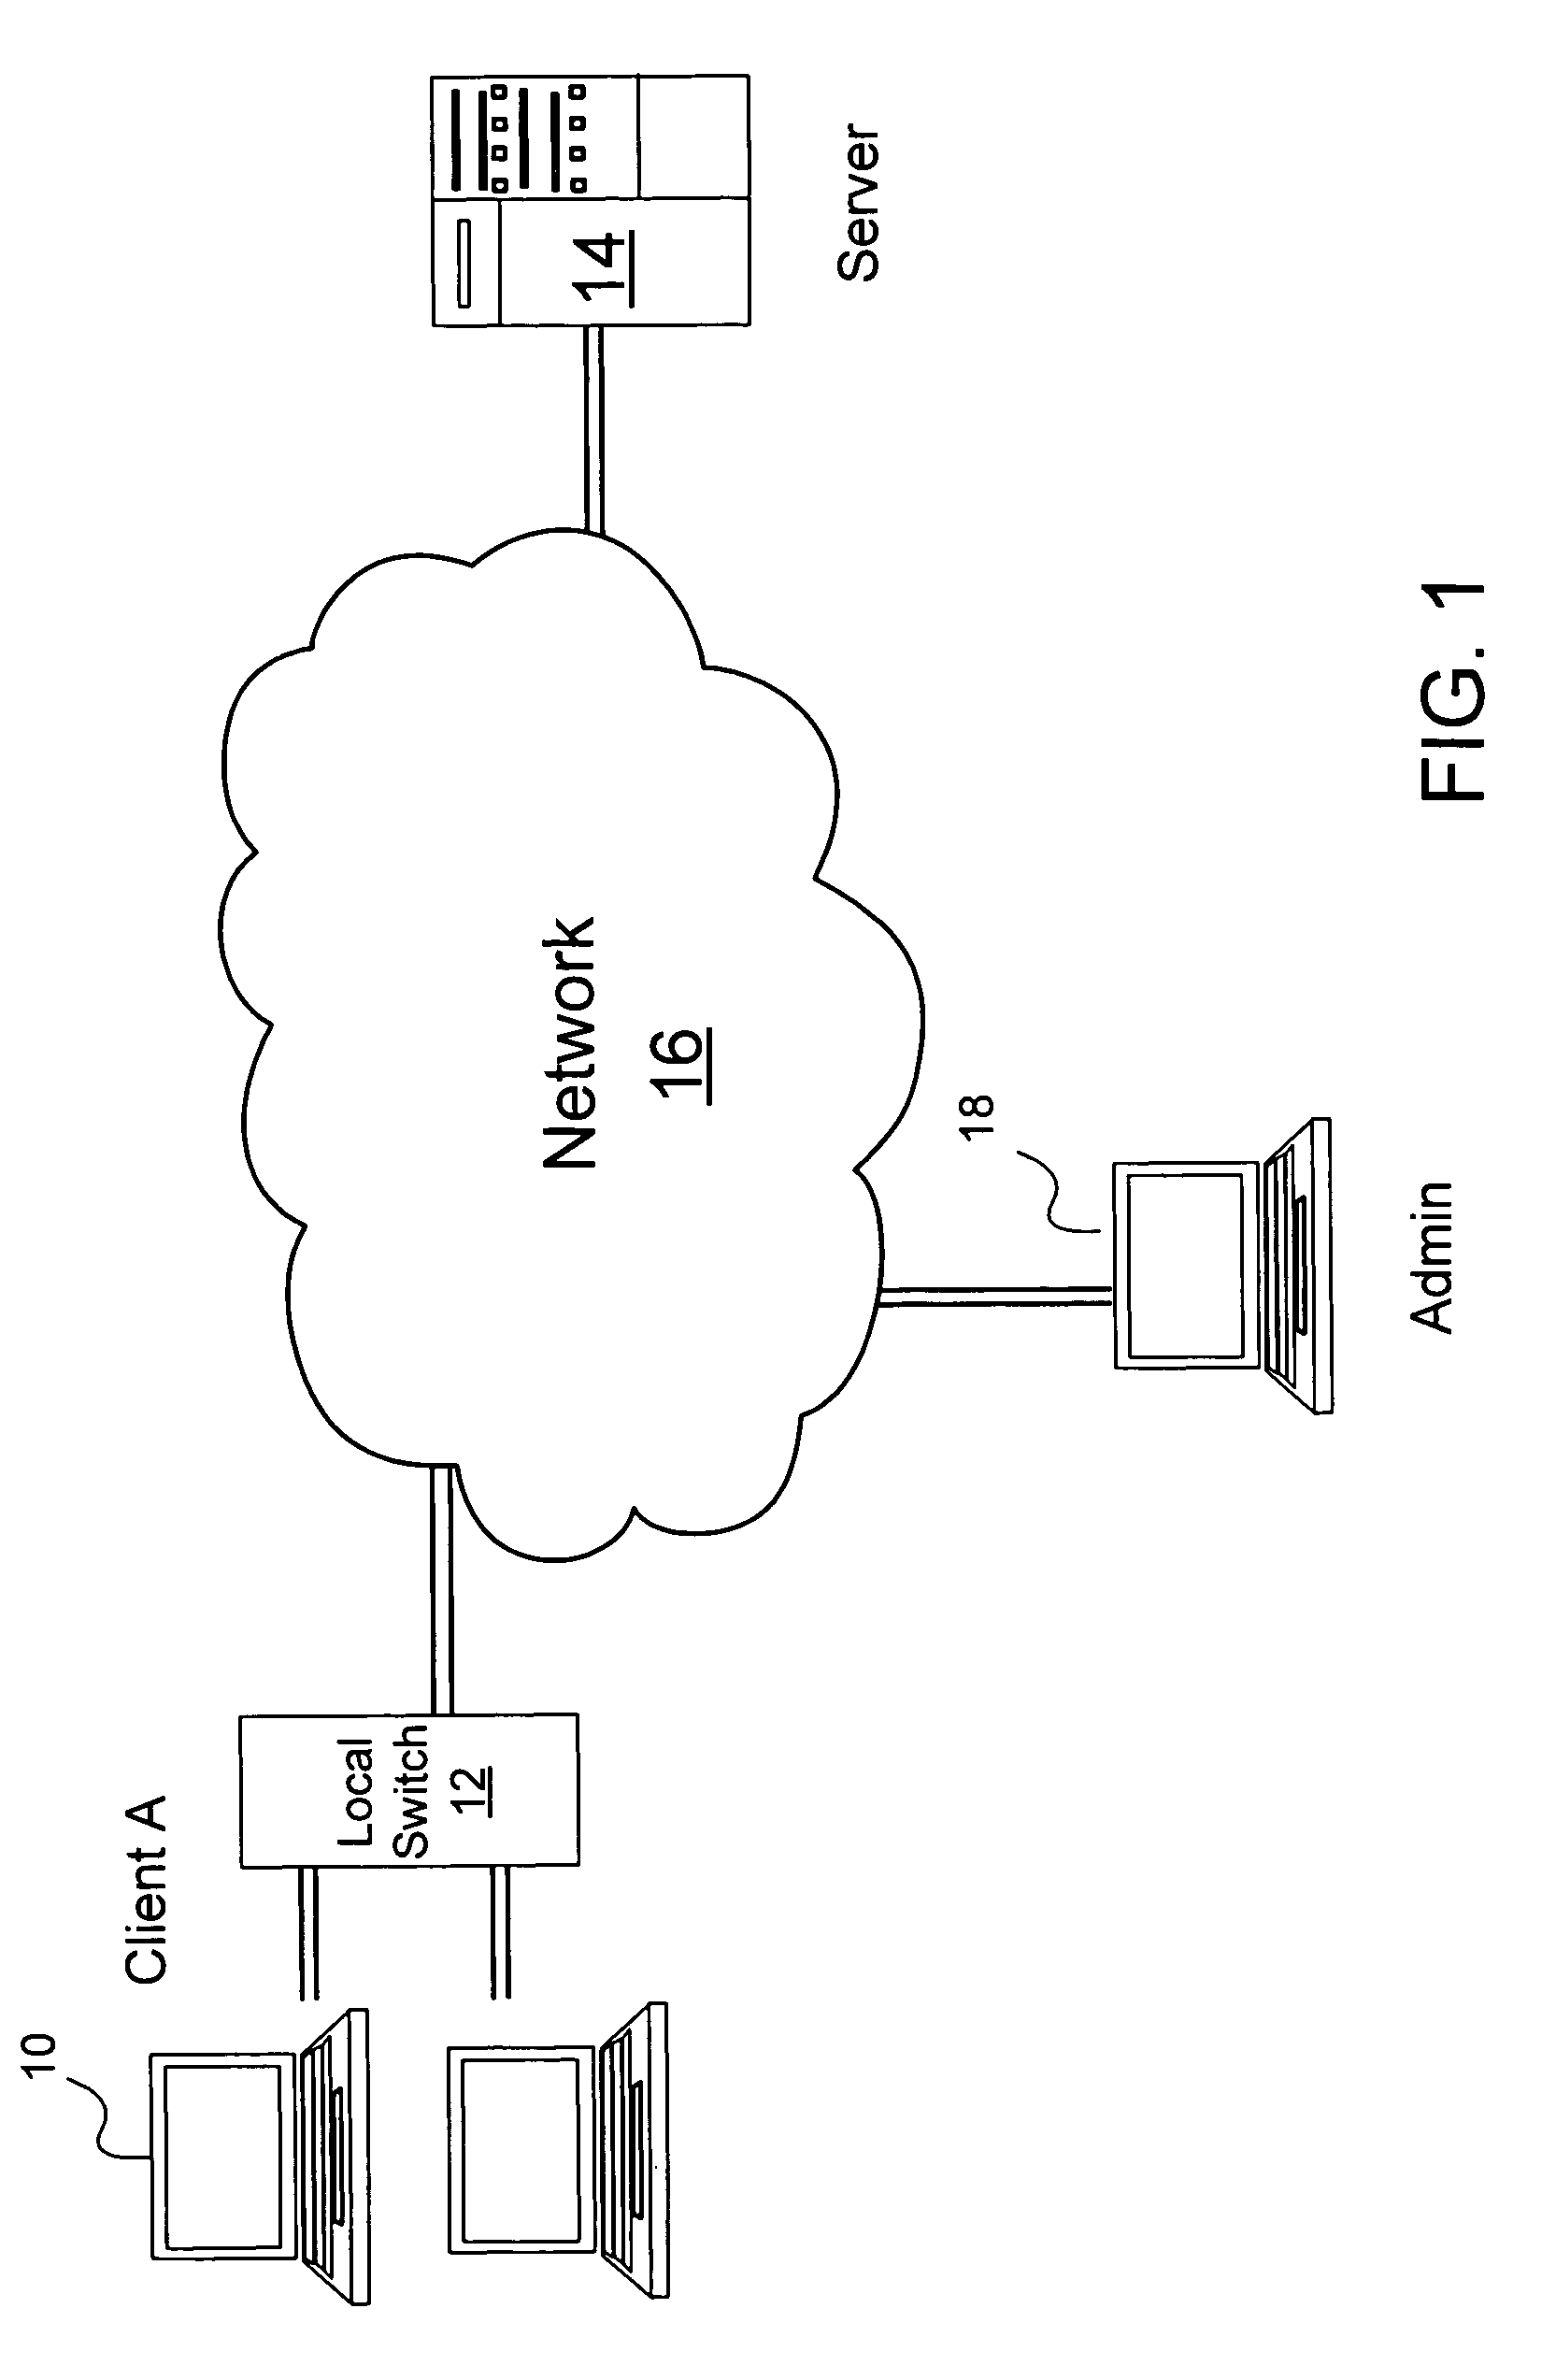 Performing simplified troubleshooting procedures to isolate connectivity problems